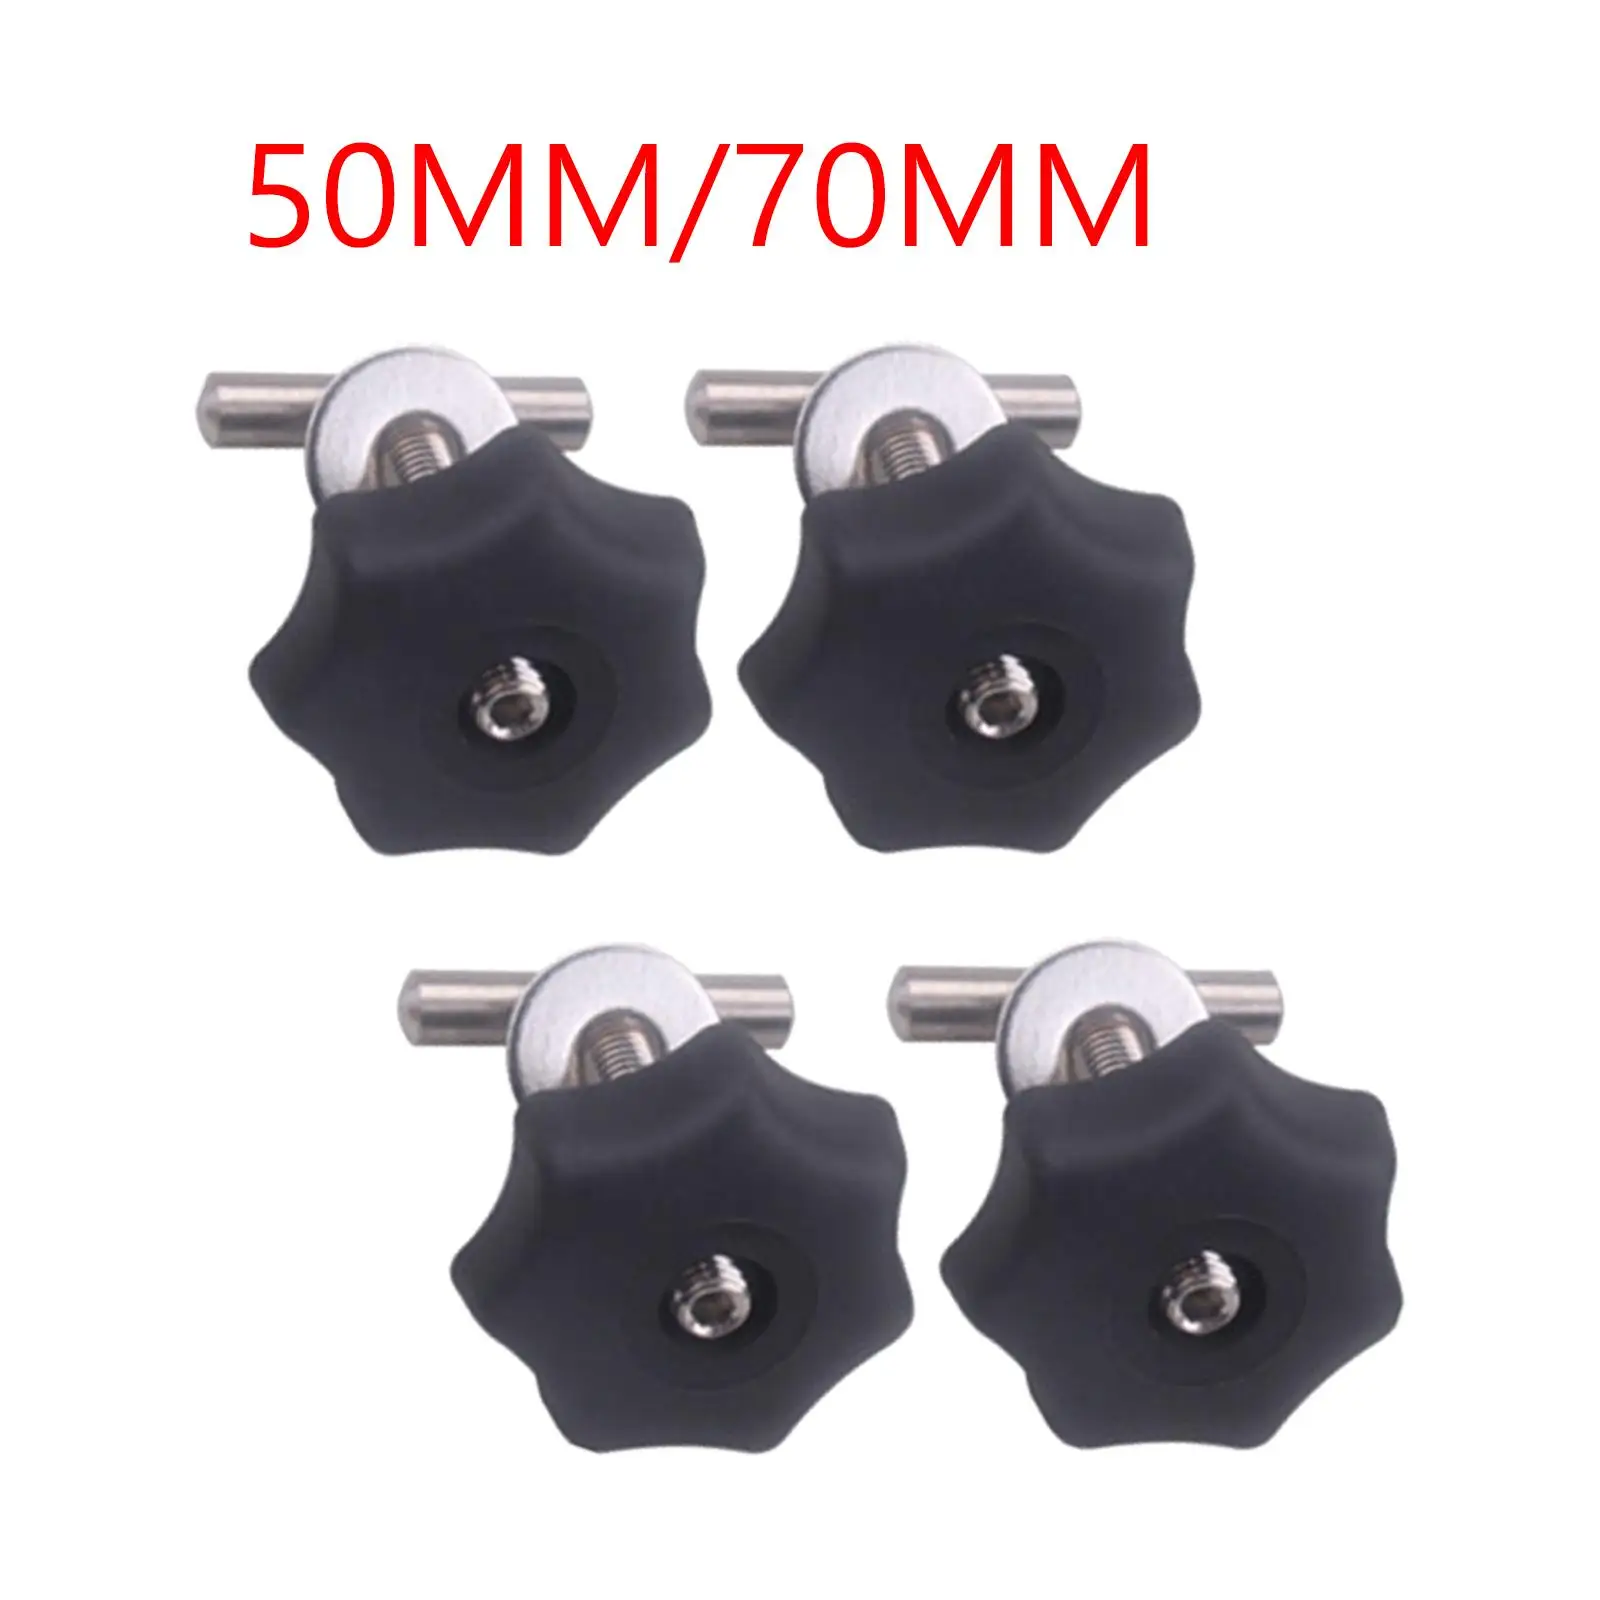 4Pcs Locking Rail Screws Bolt Set Mounting Accessories Stainless Steel Stable